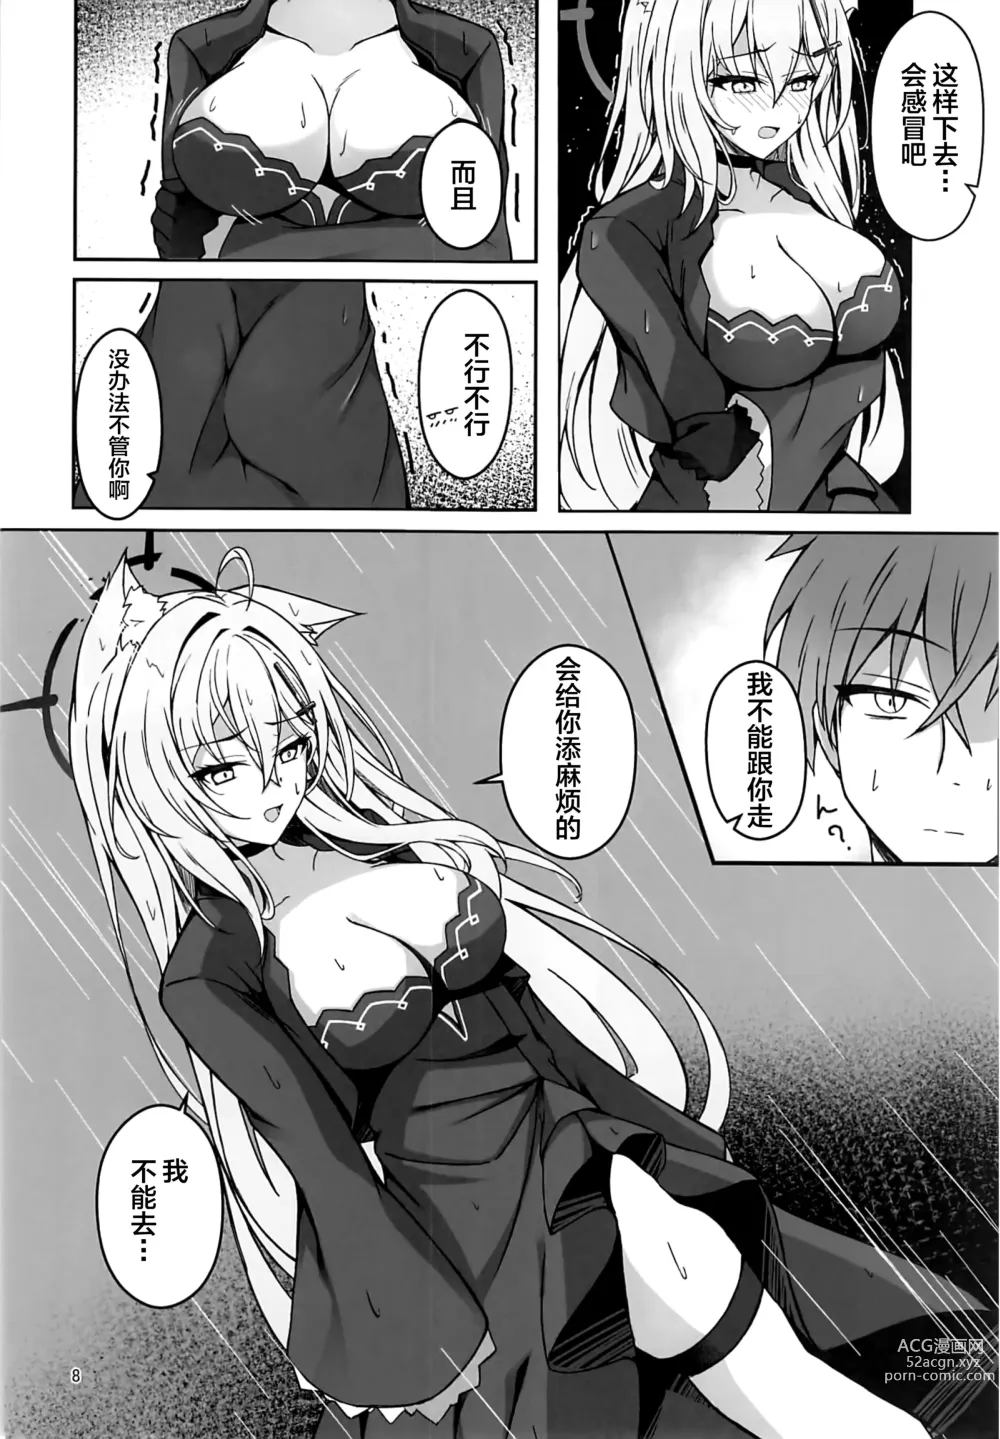 Page 7 of doujinshi Rain dew frost snow